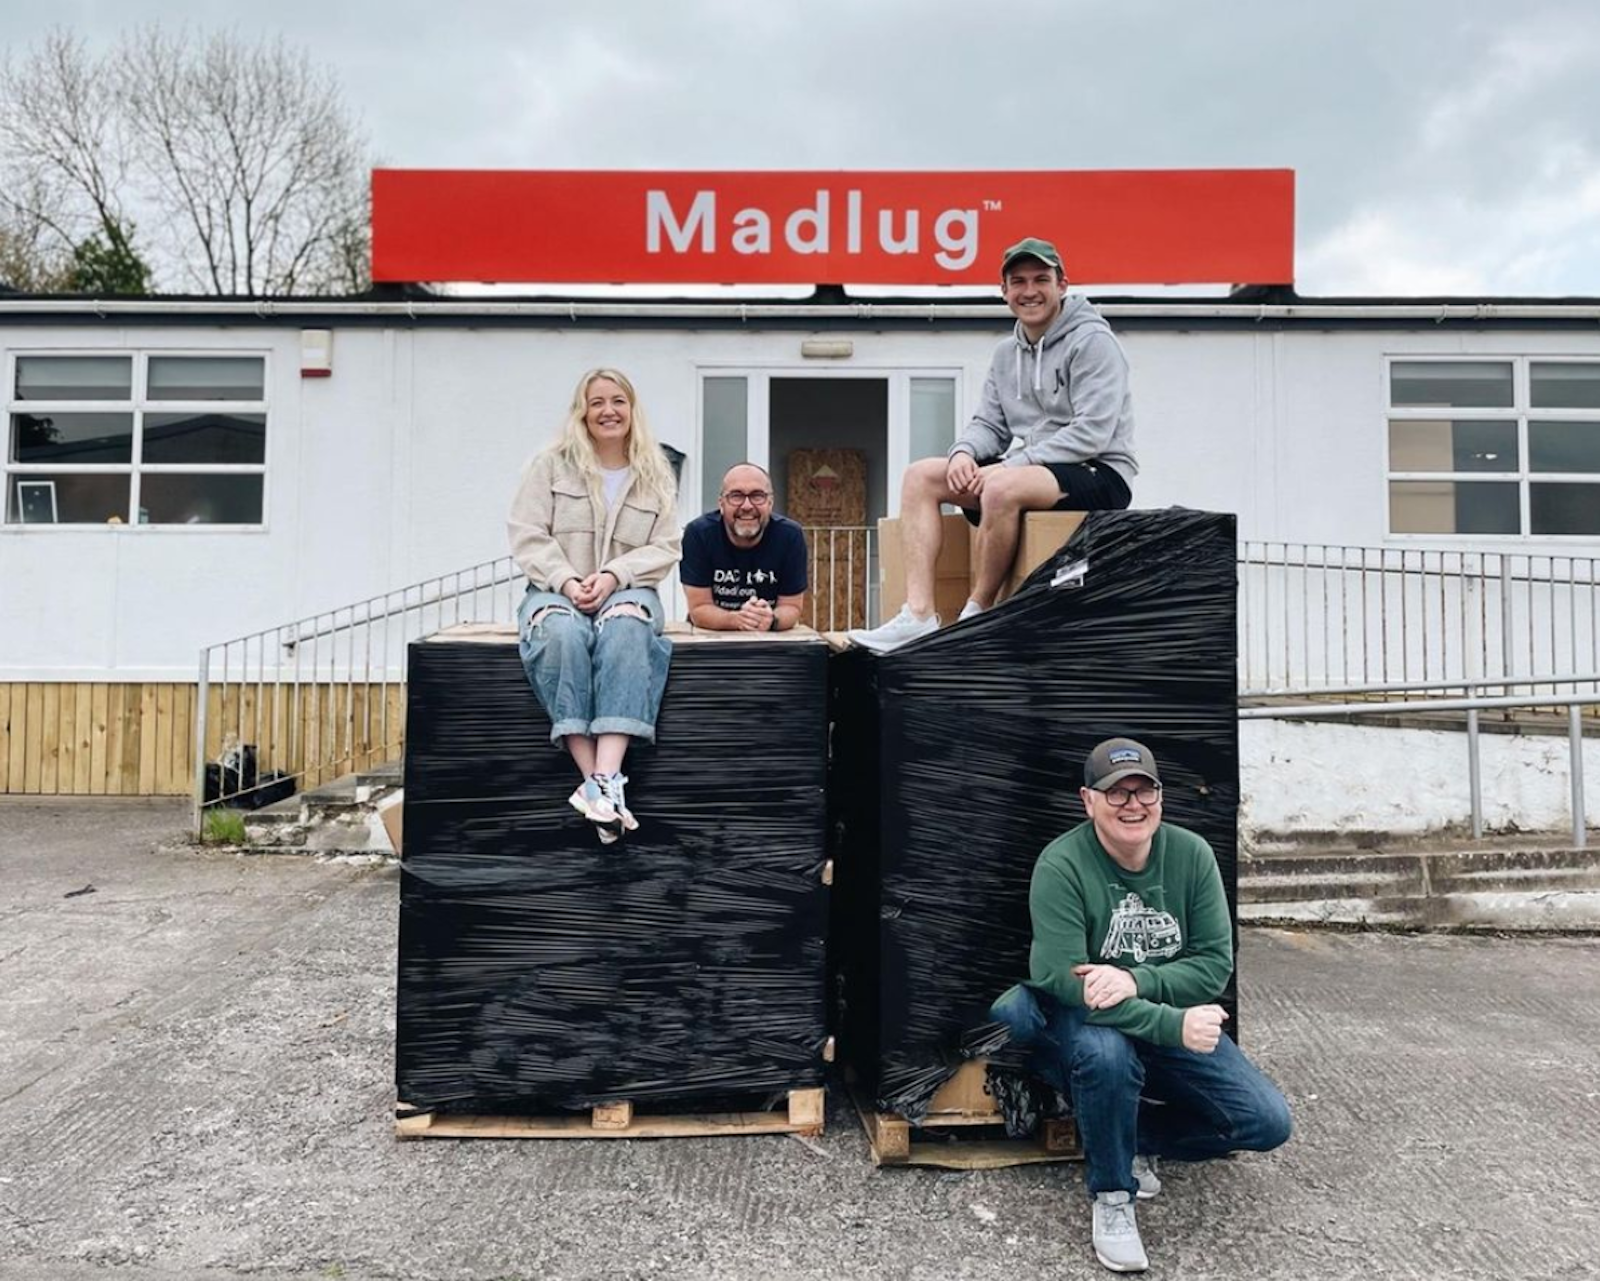 Dave Linton and members of his team pose with a newly fulfilled order shipment outside the Madlug office in Northern Ireland.